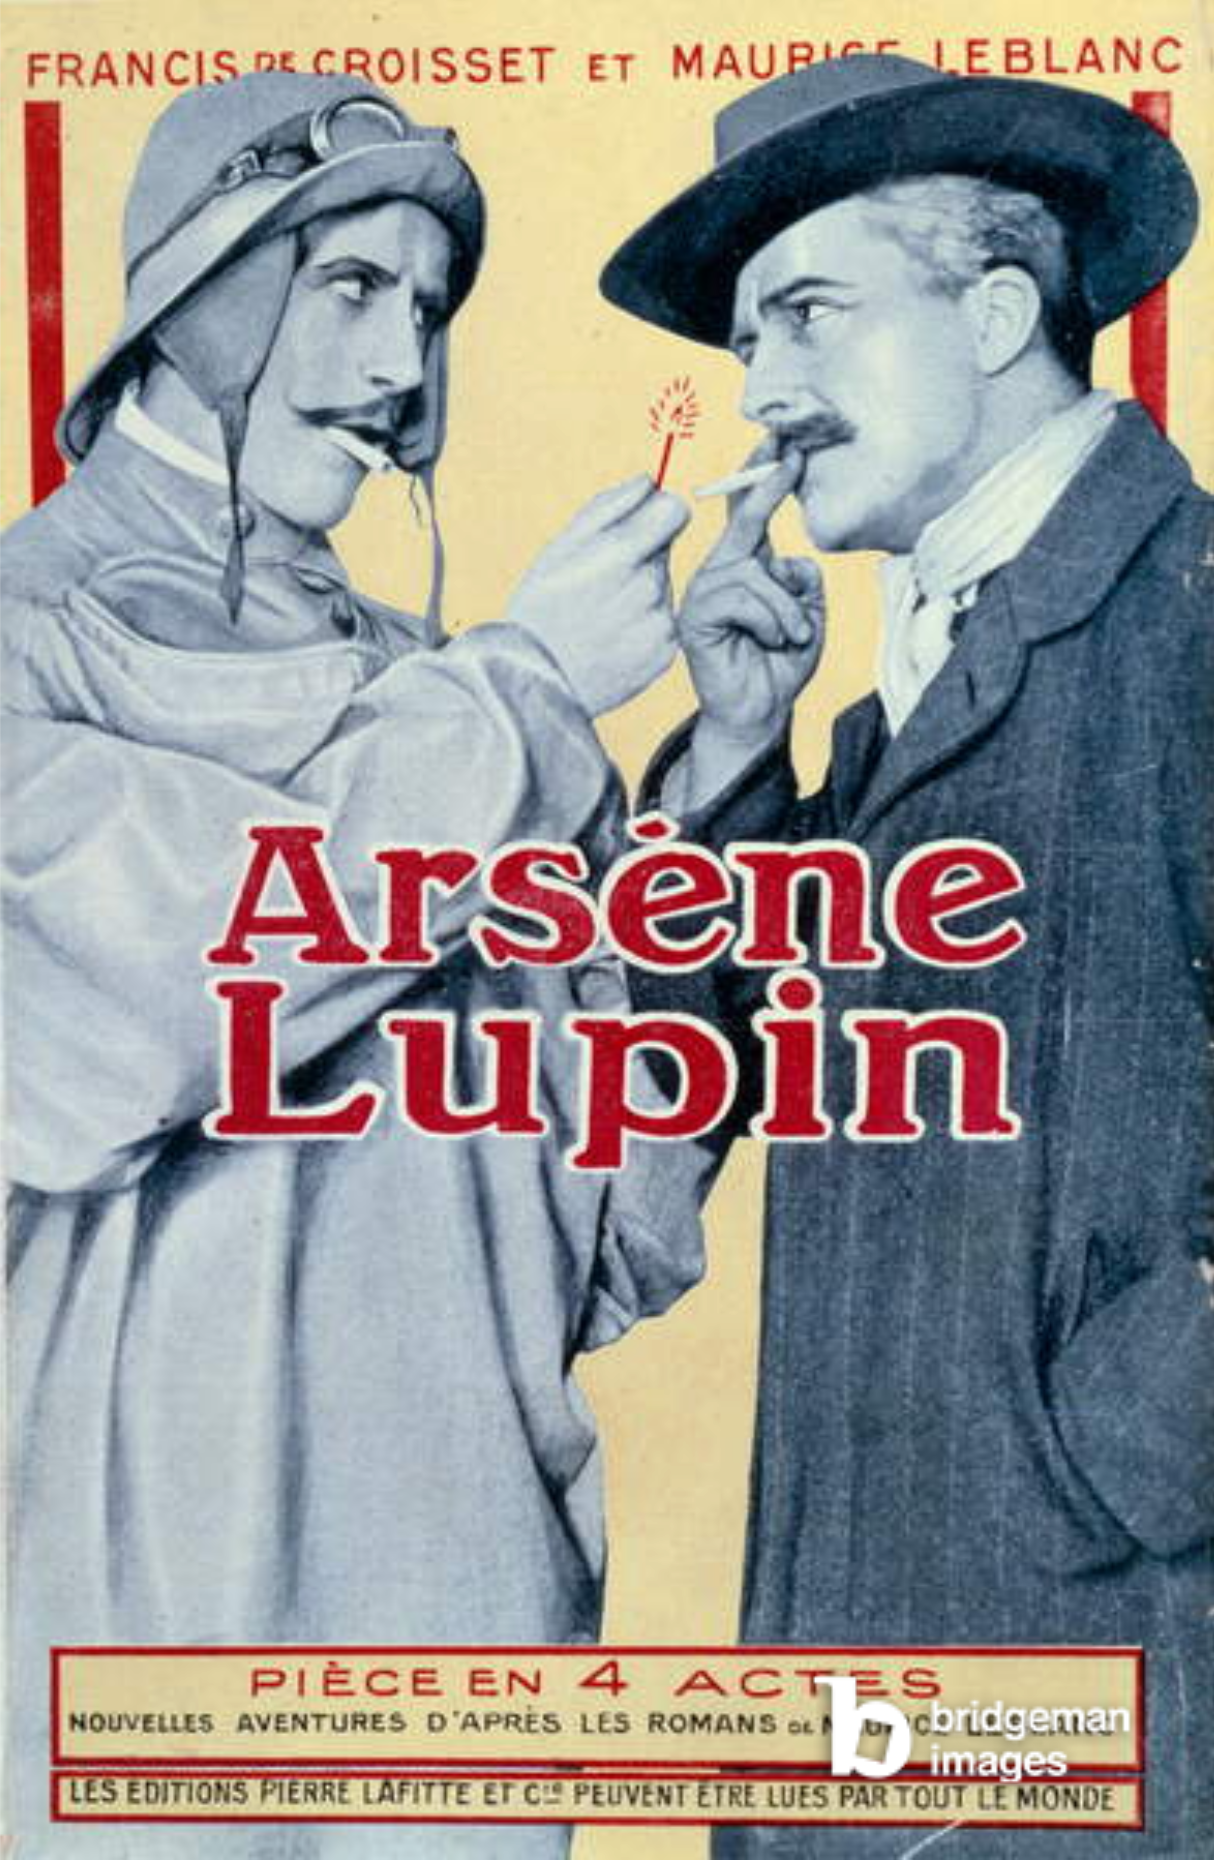 Cover of the book "Arsène Lupine" by Francis Boisset and Maurice Leblanc, 20th century / National Library, Paris, France / Photo © Photo Josse / Bridgeman Images